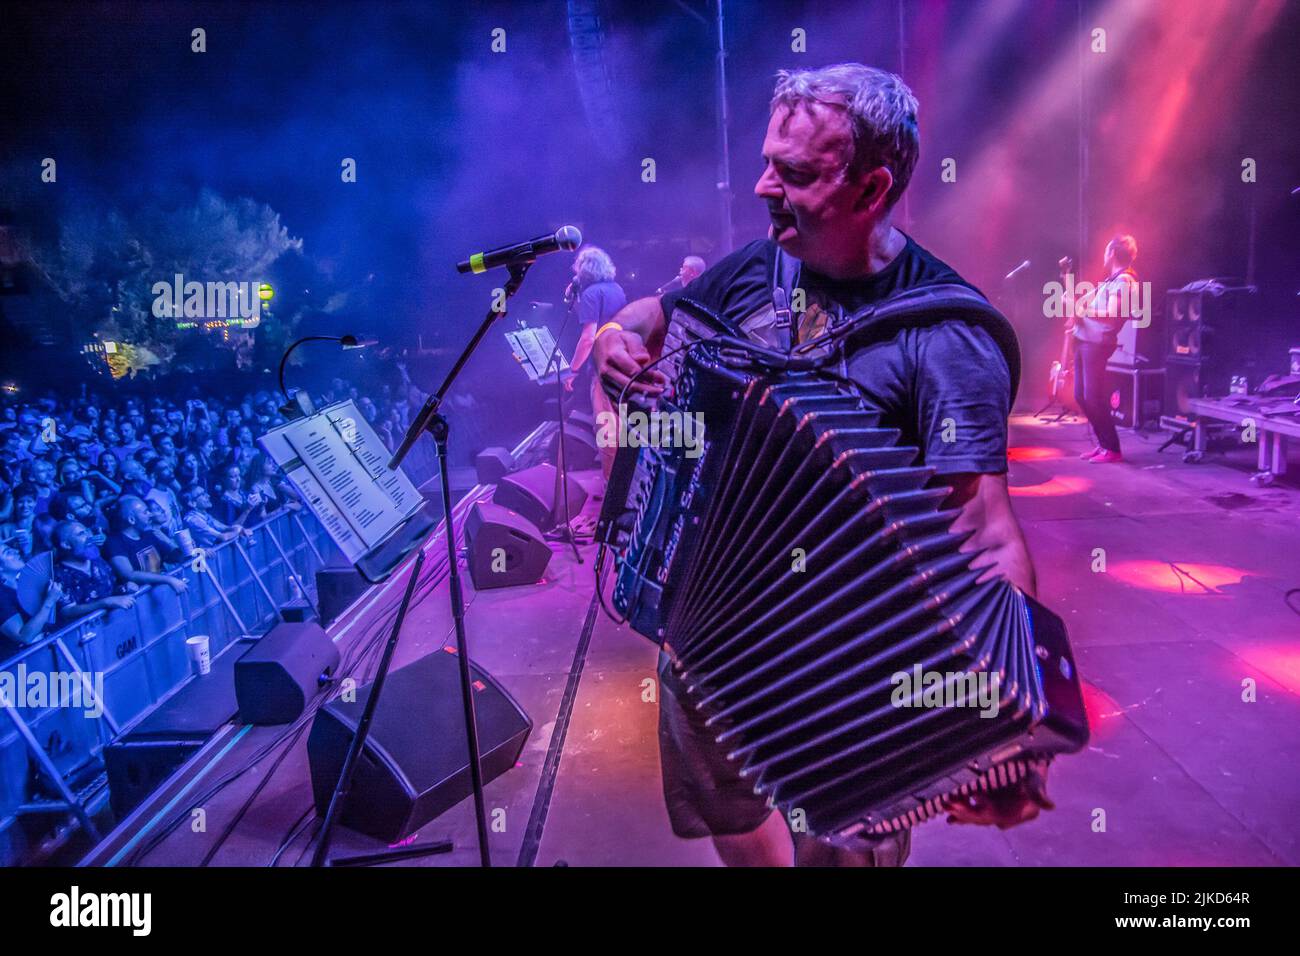 Madrid, Spain. 30th July, 2022. Film director and musician Emir Kusturica has announced his farewell tour as a band at the Noches del Botanico festival in Madrid, Spain before thousands of spectators on a tropical and festive night. (Photo by Alberto Sibaja/Pacific Press/Sipa USA) Credit: Sipa USA/Alamy Live News Stock Photo